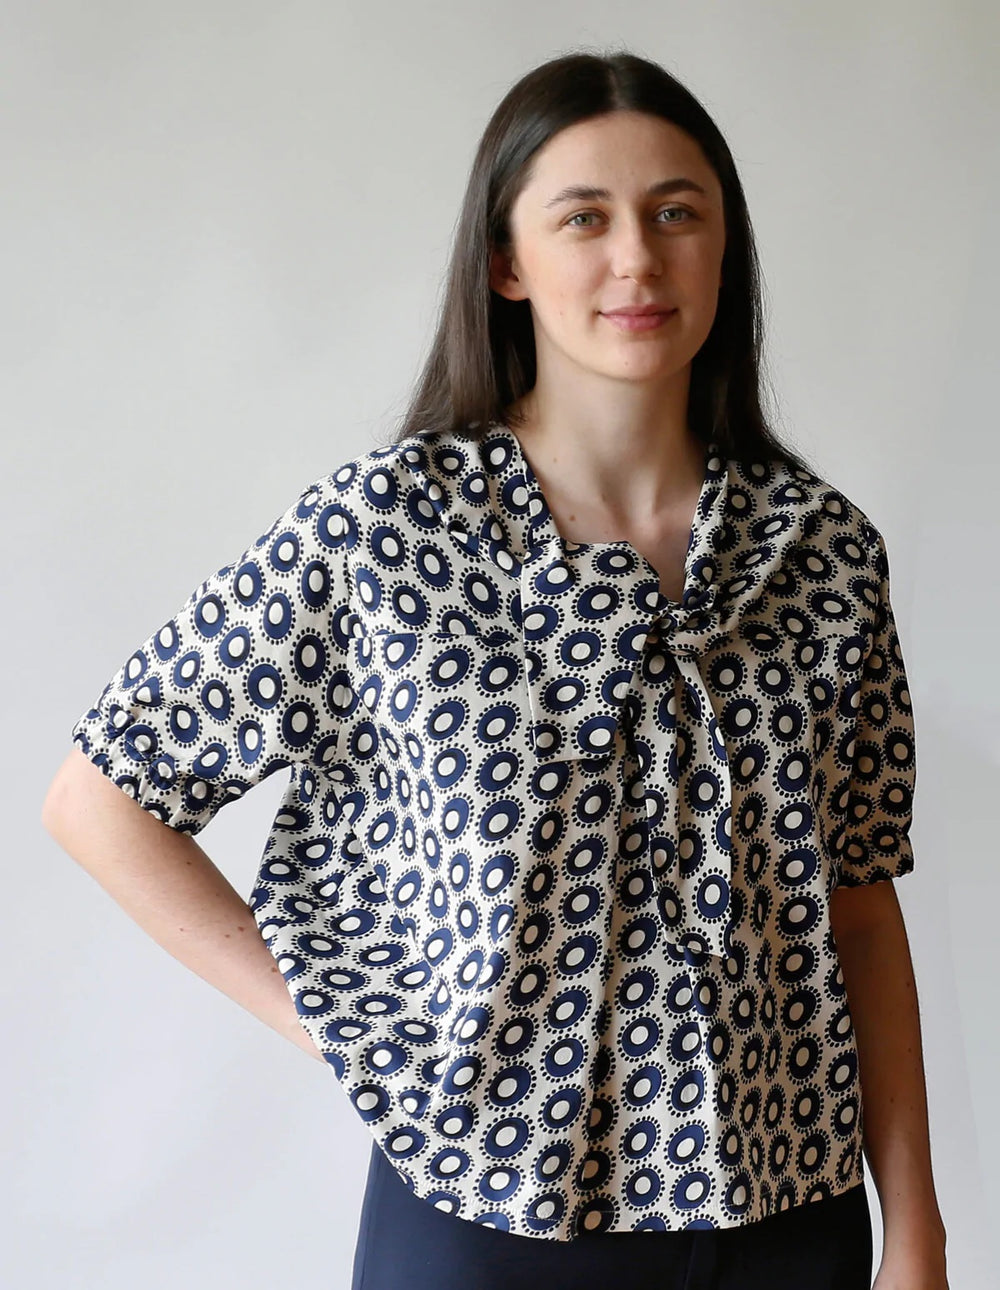 Woman wearing the Tie Blouse sewing pattern from The Maker's Atelier on The Fold Line. A blouse pattern made in fine count cotton, Tana lawn, silk, tencel, or viscose fabrics, featuring a pull-on style, relaxed fit, elbow length sleeves, front neck tie, f